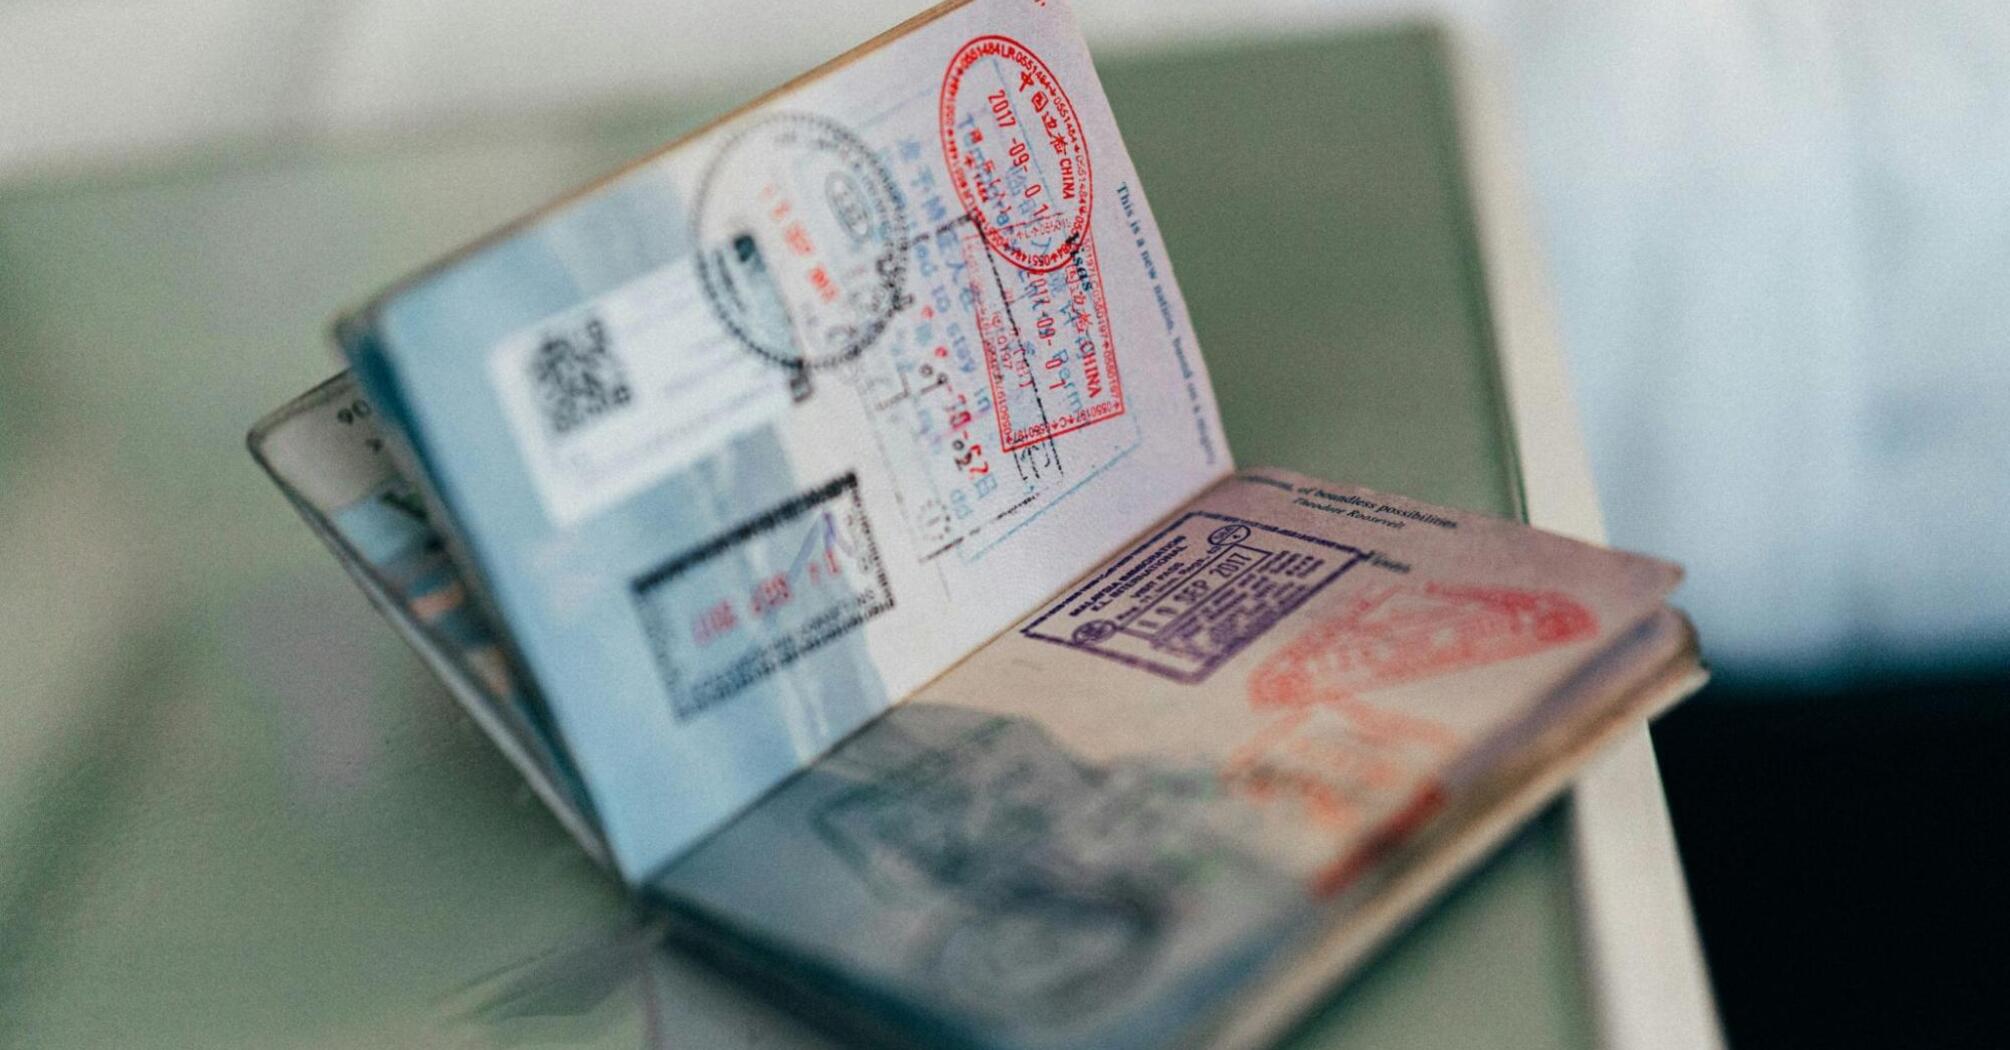 Open passport with various visa stamps on pages